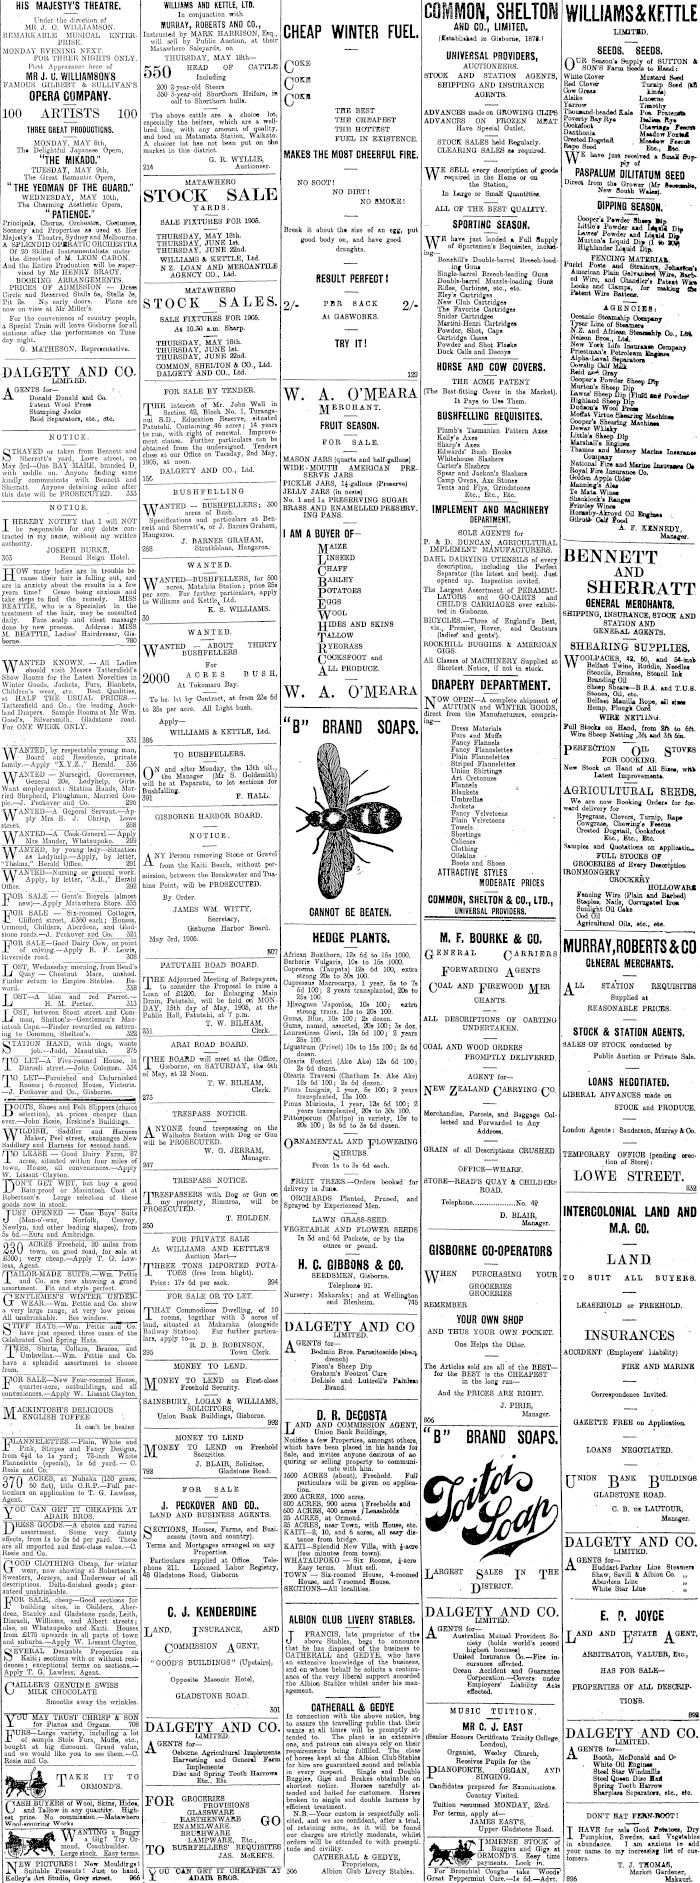 Papers Past Newspapers Poverty Bay Herald 4 May 1905 Page 3 Advertisements Column 2